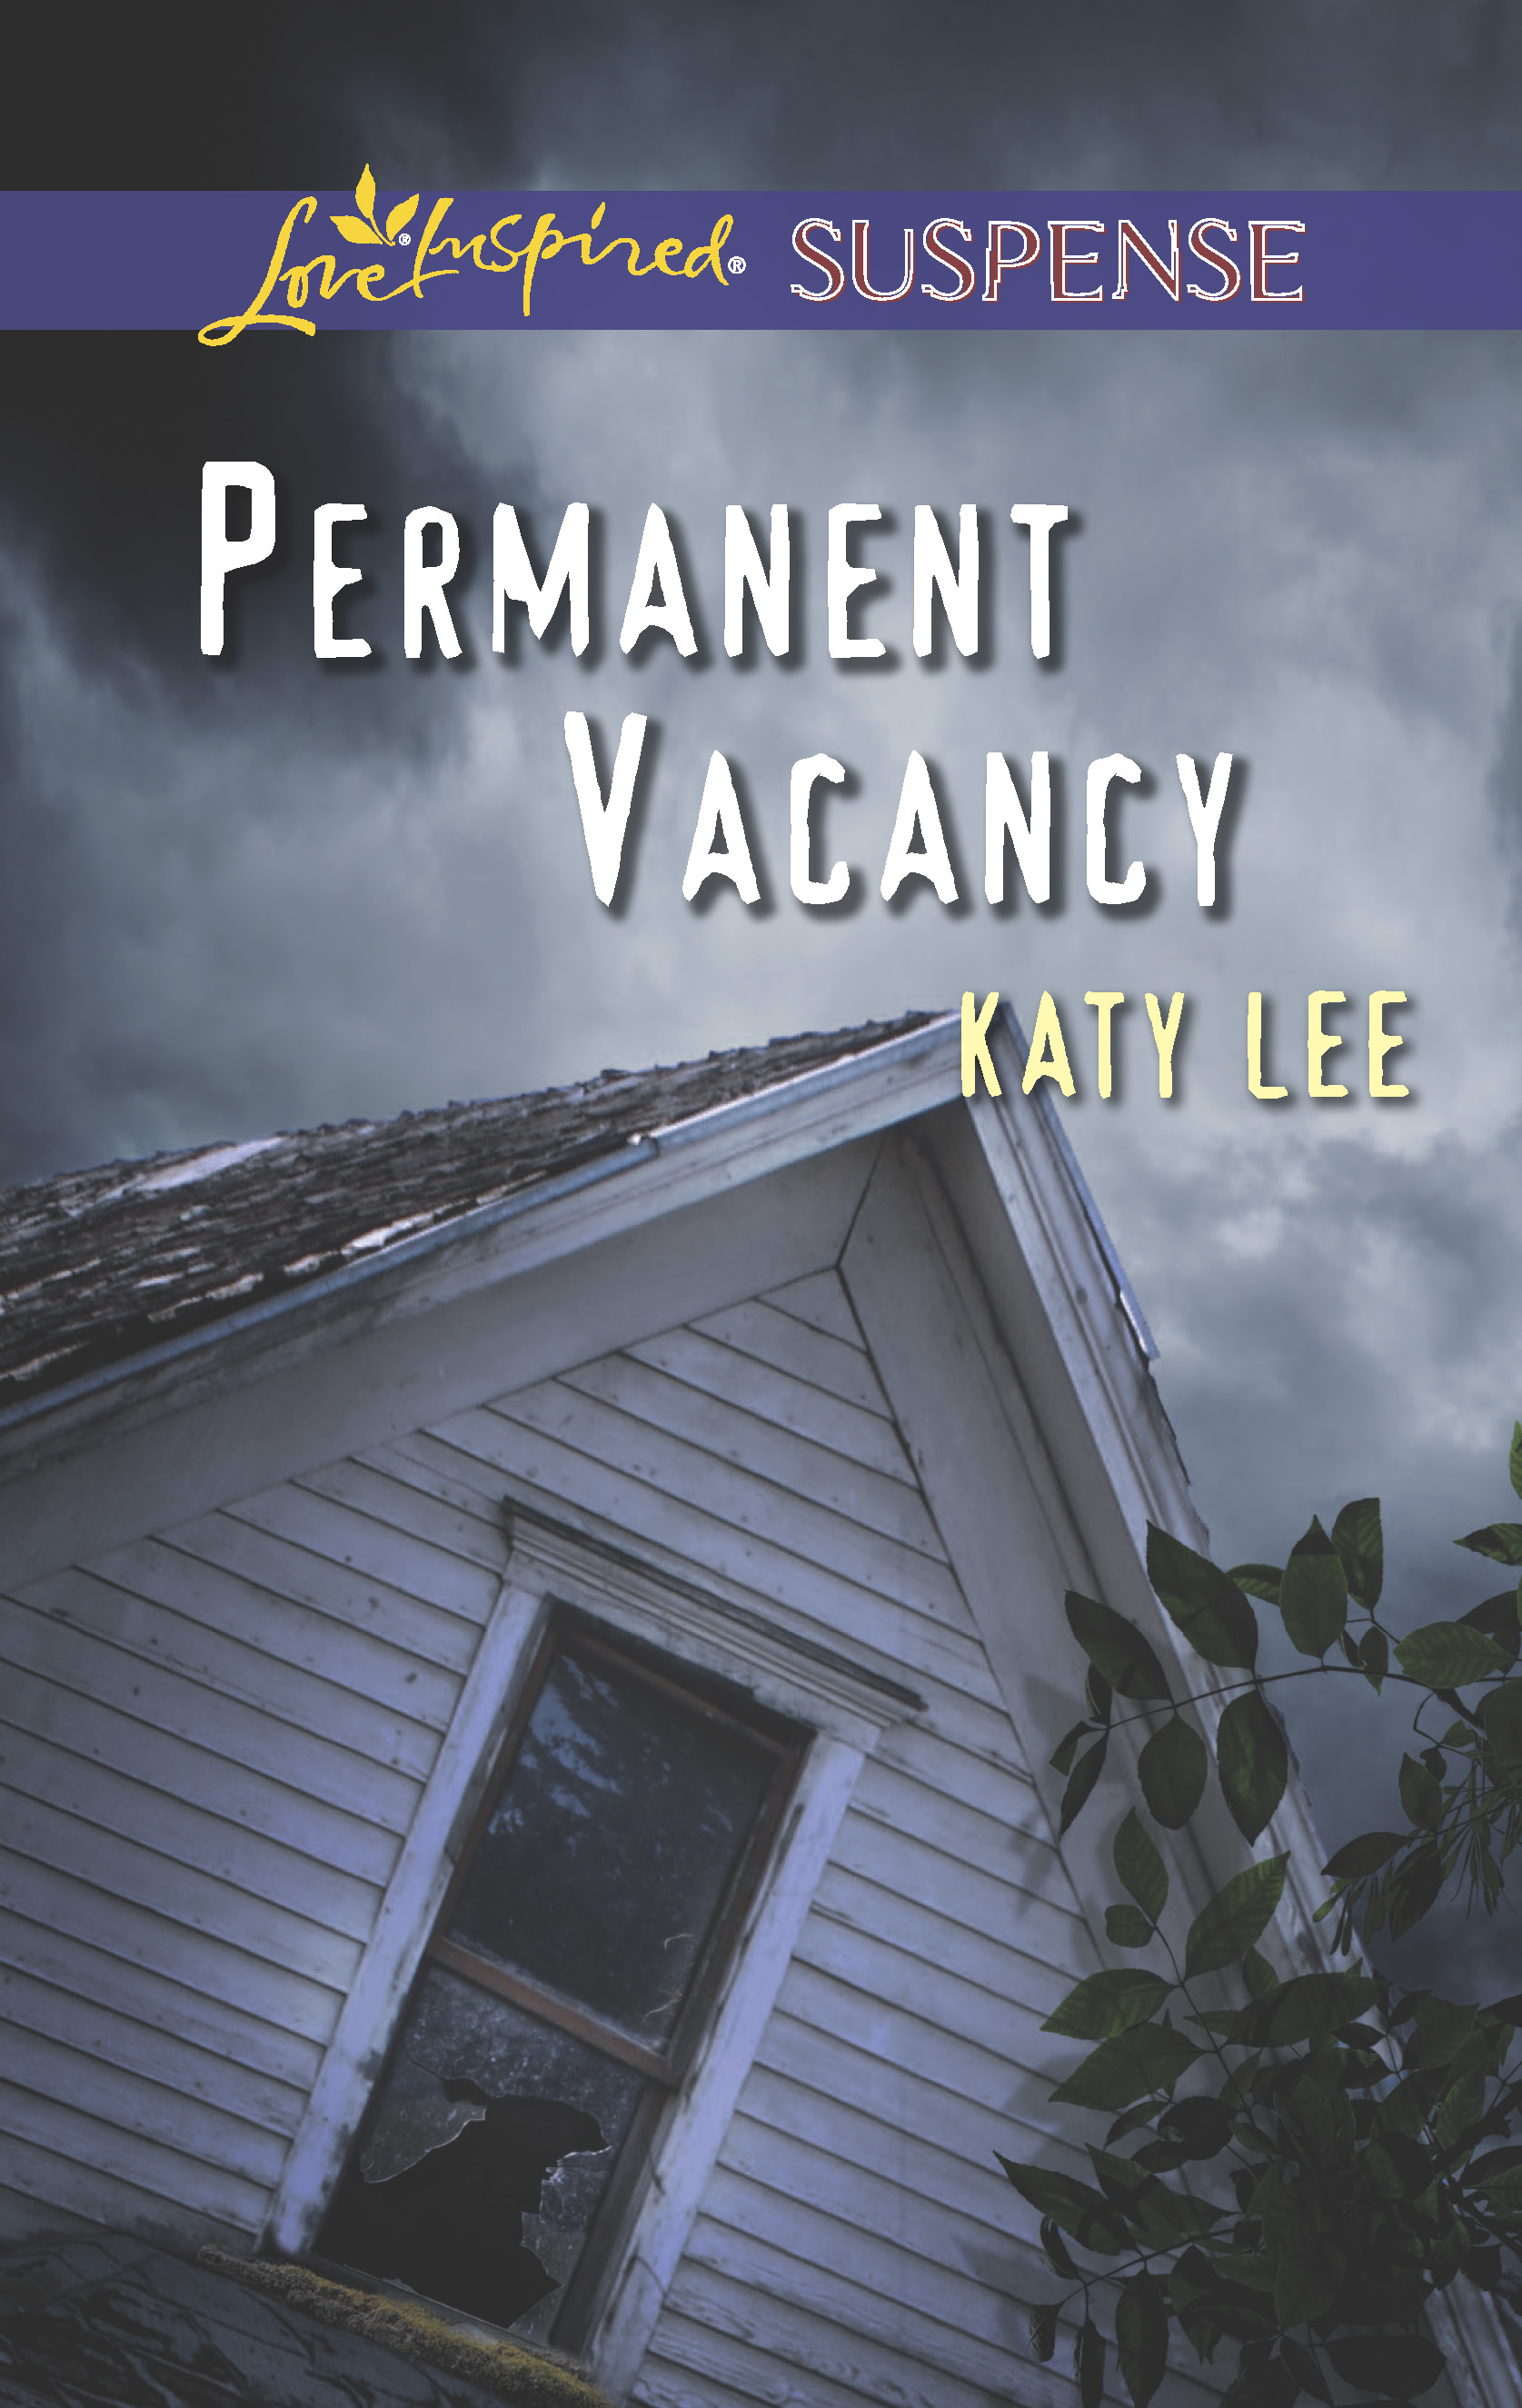 Review of Permanent Vacancy by Katy Lee